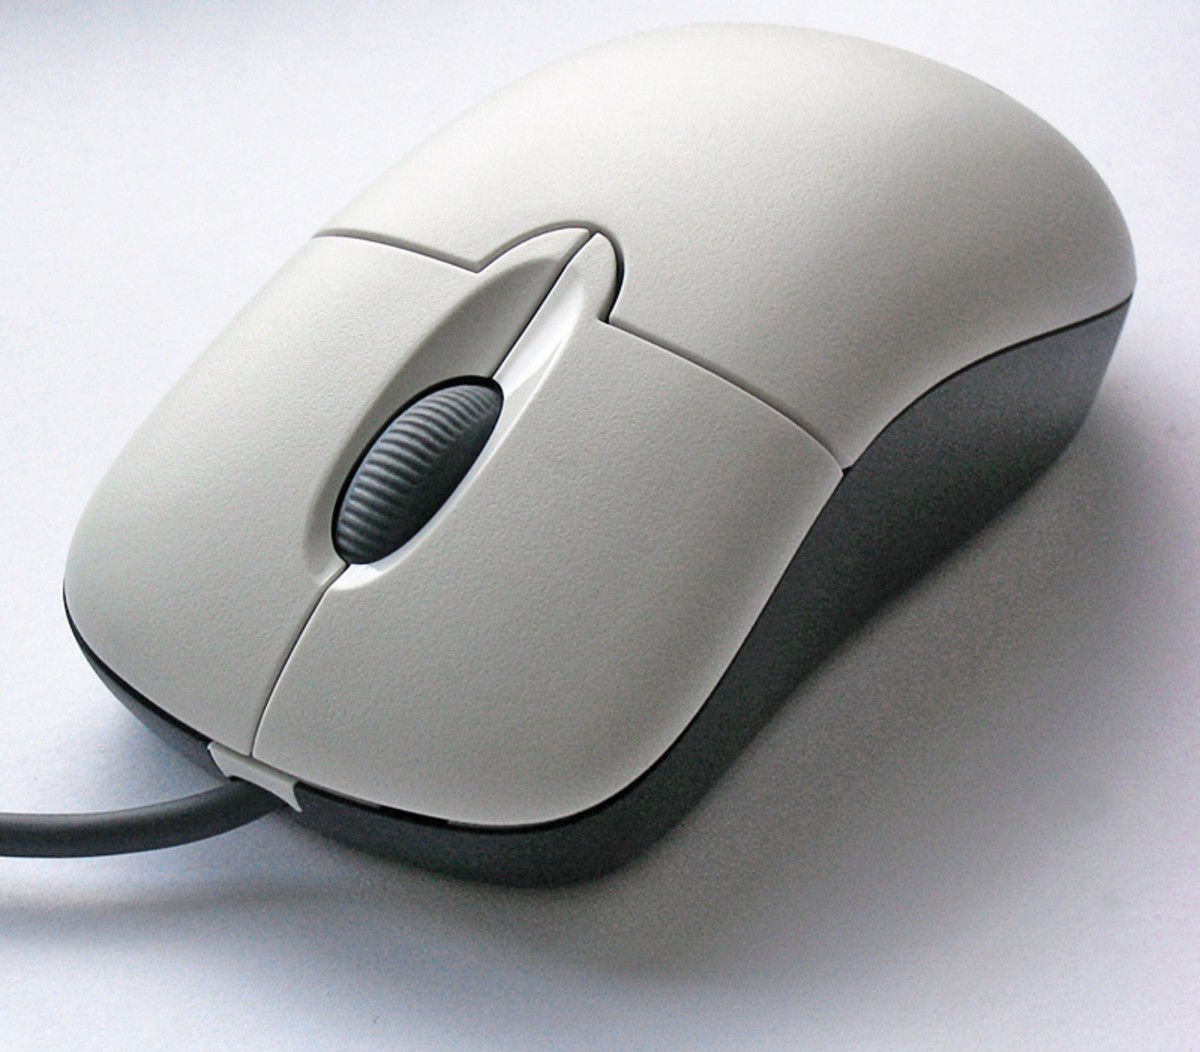 A Computer Mouse